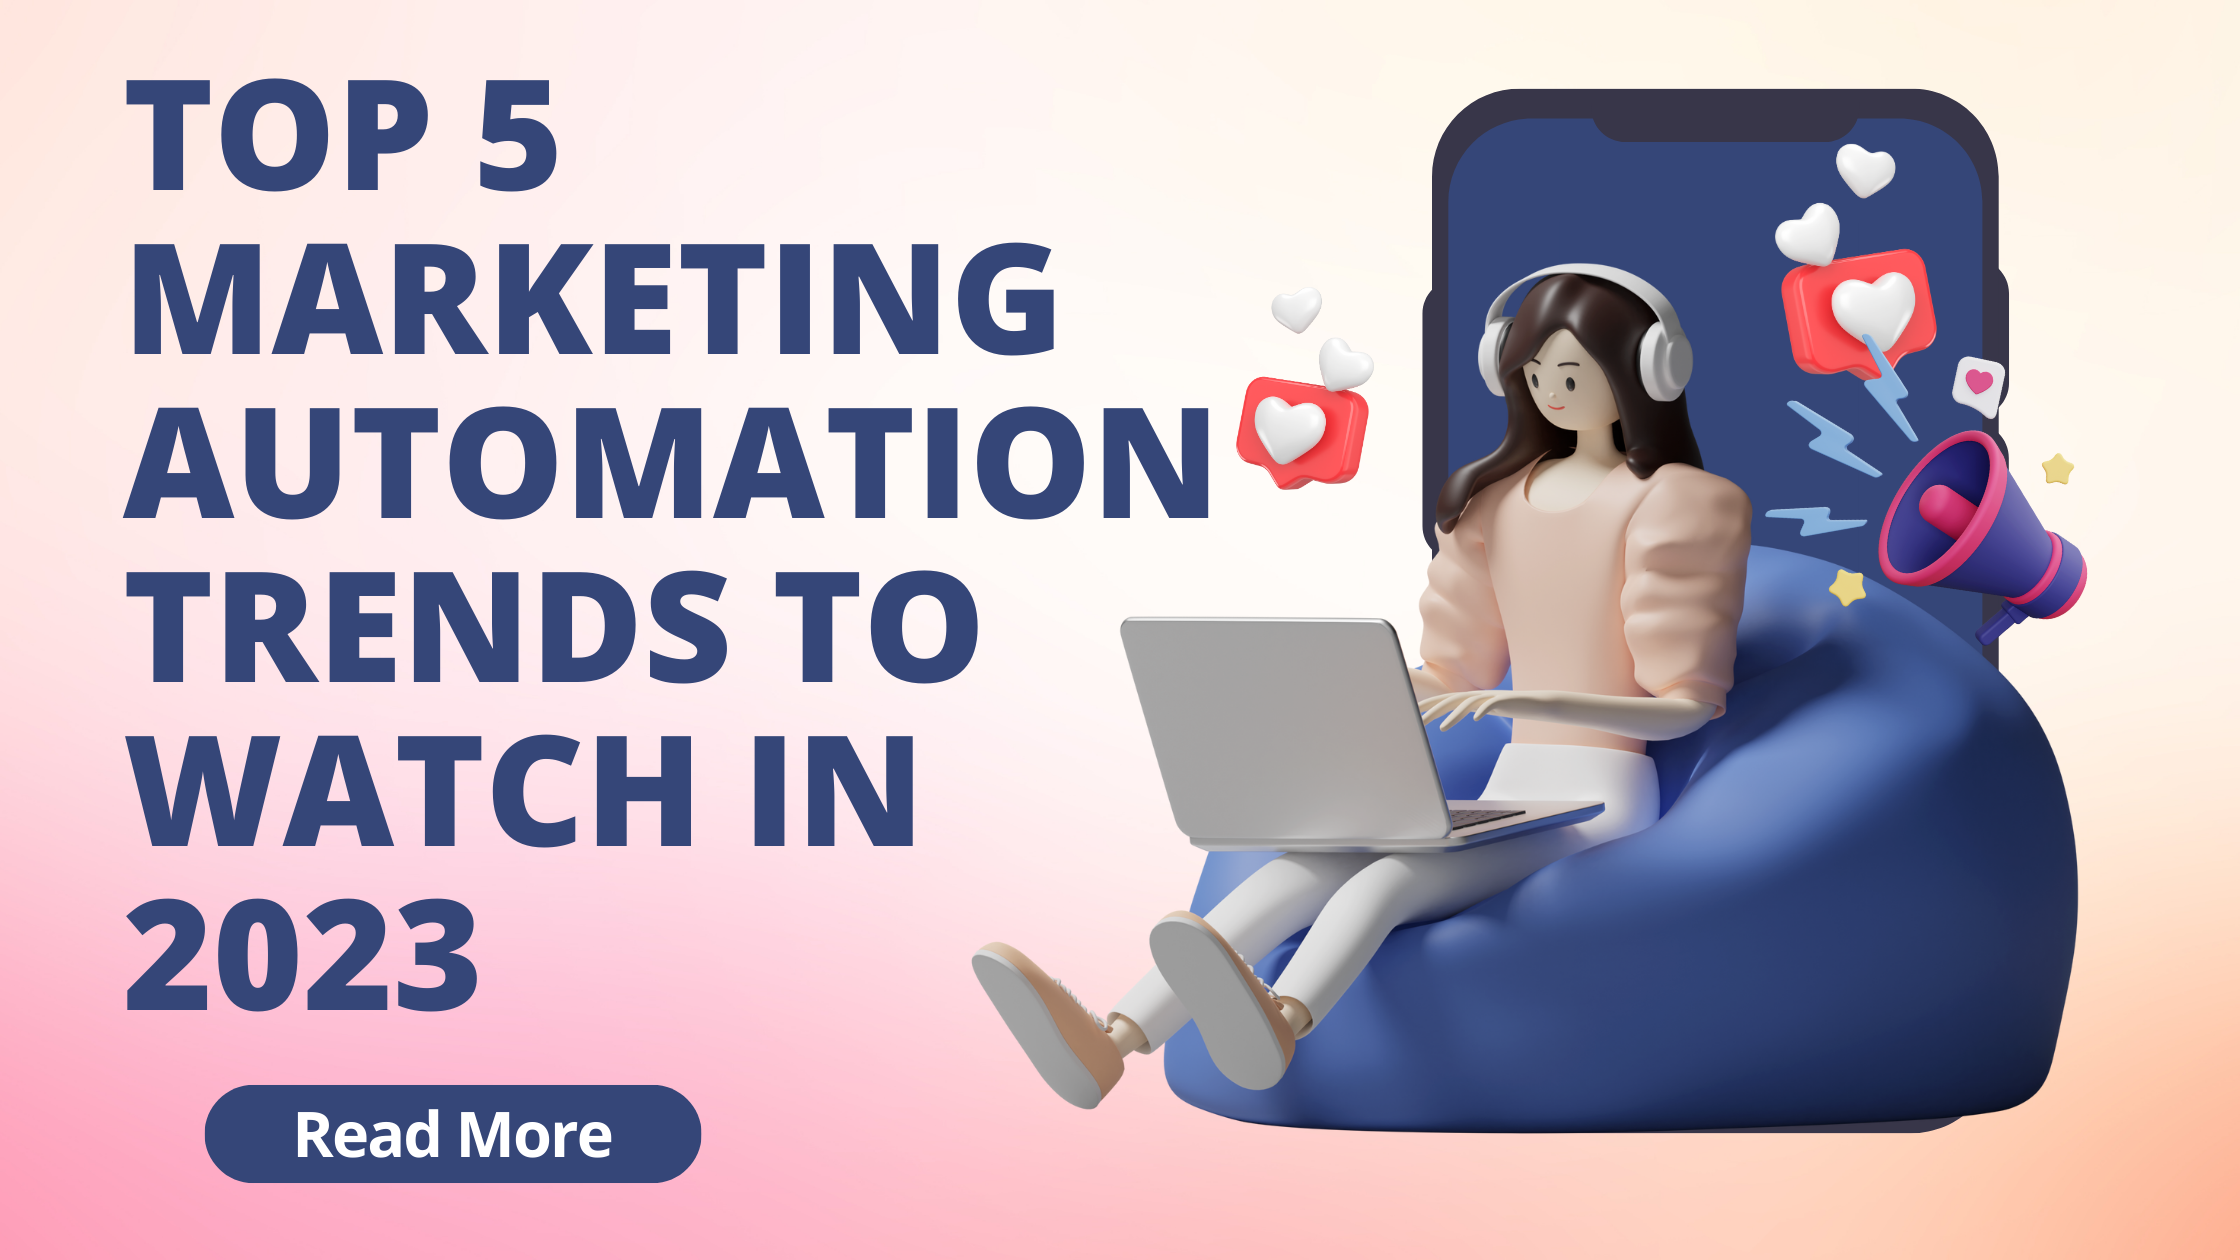 You are currently viewing Top 5 Marketing Automation Trends in 2023!